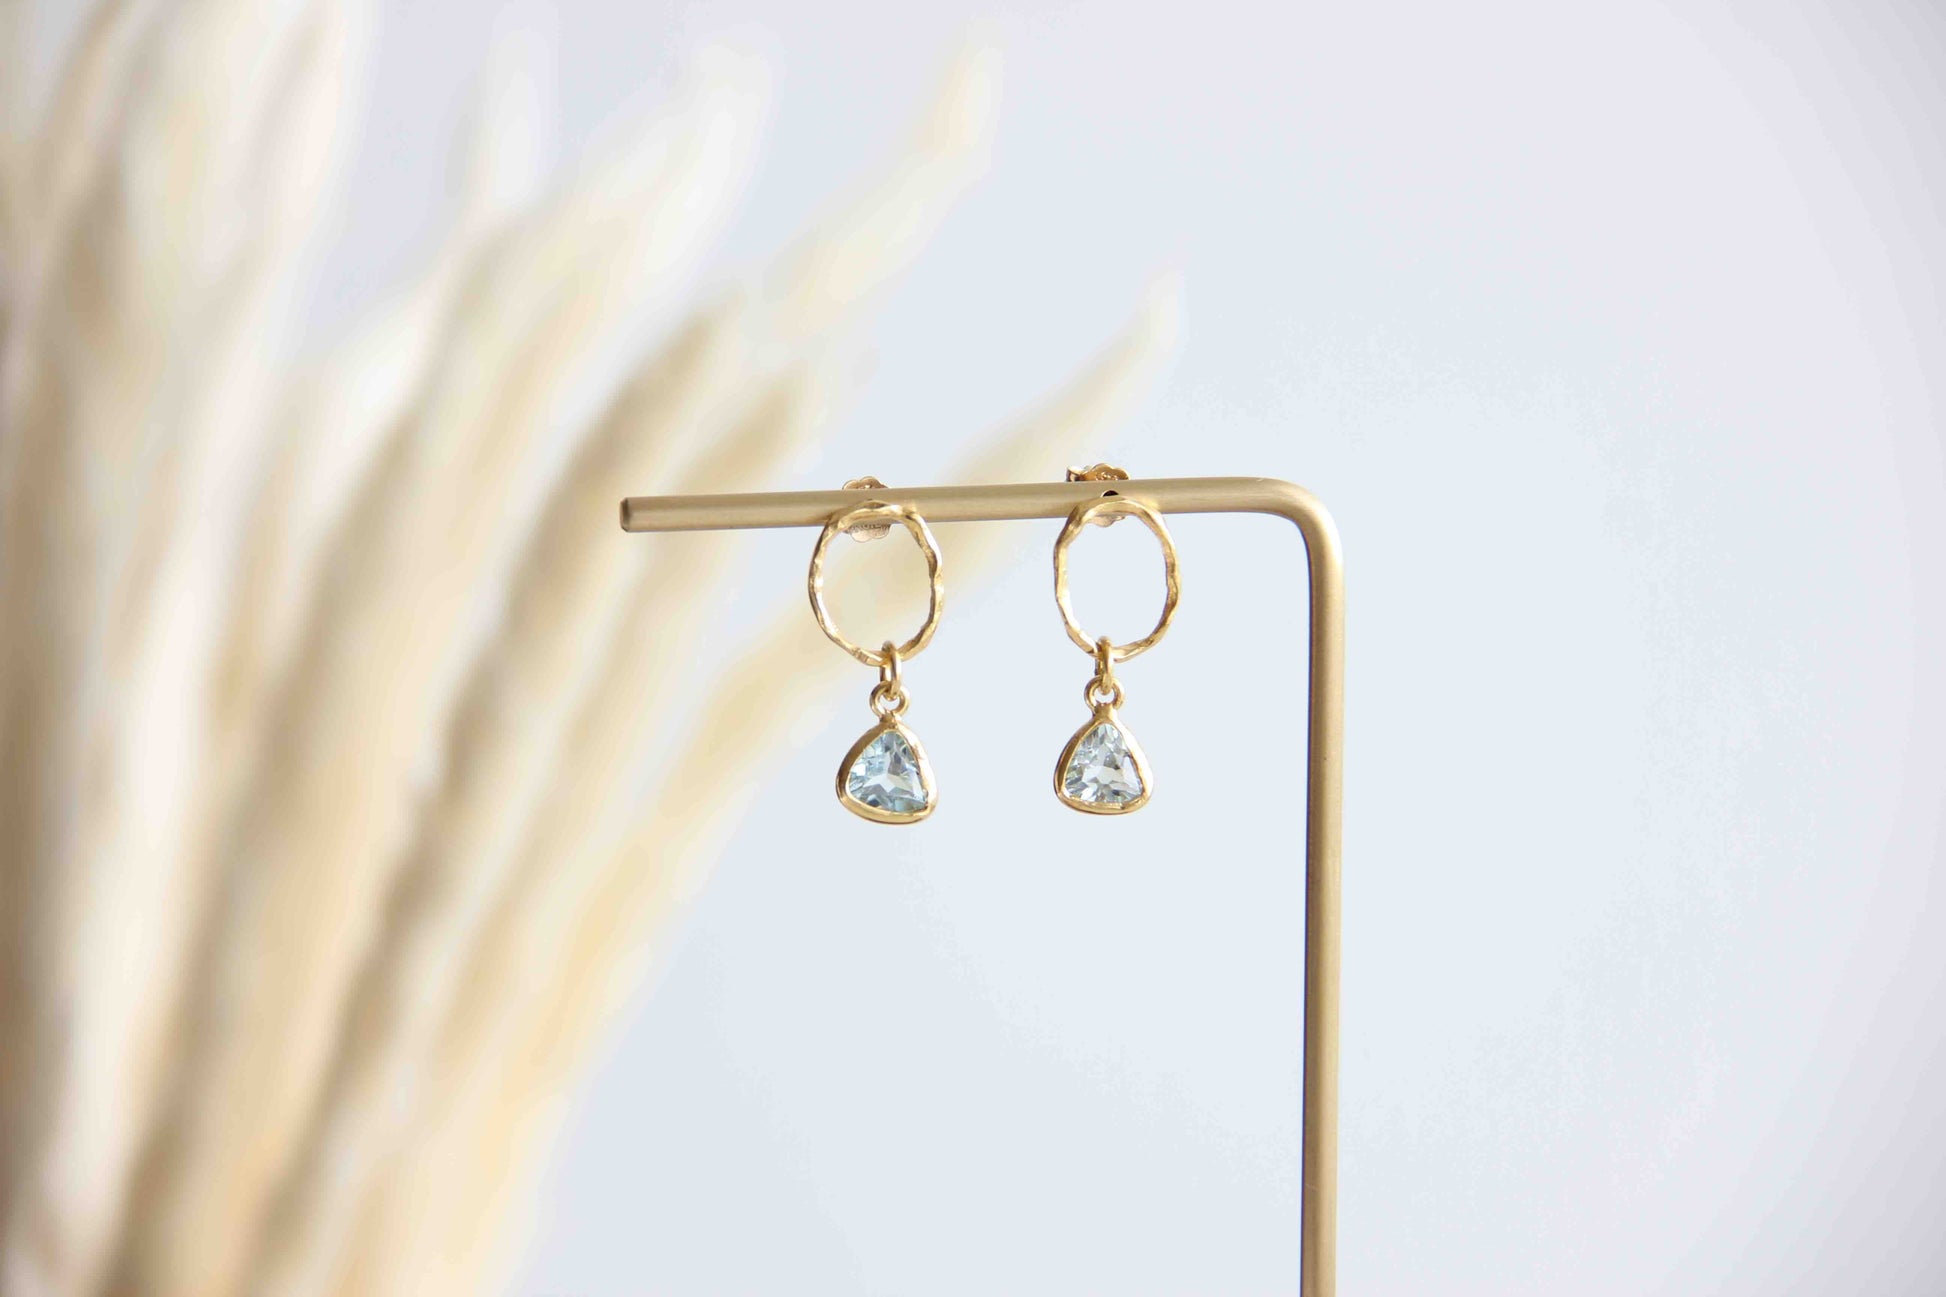 Beautiful Triangle Blue Topaz Earrings with 14k gold micro plated for long lasting on solid 925 Sterling Silver.